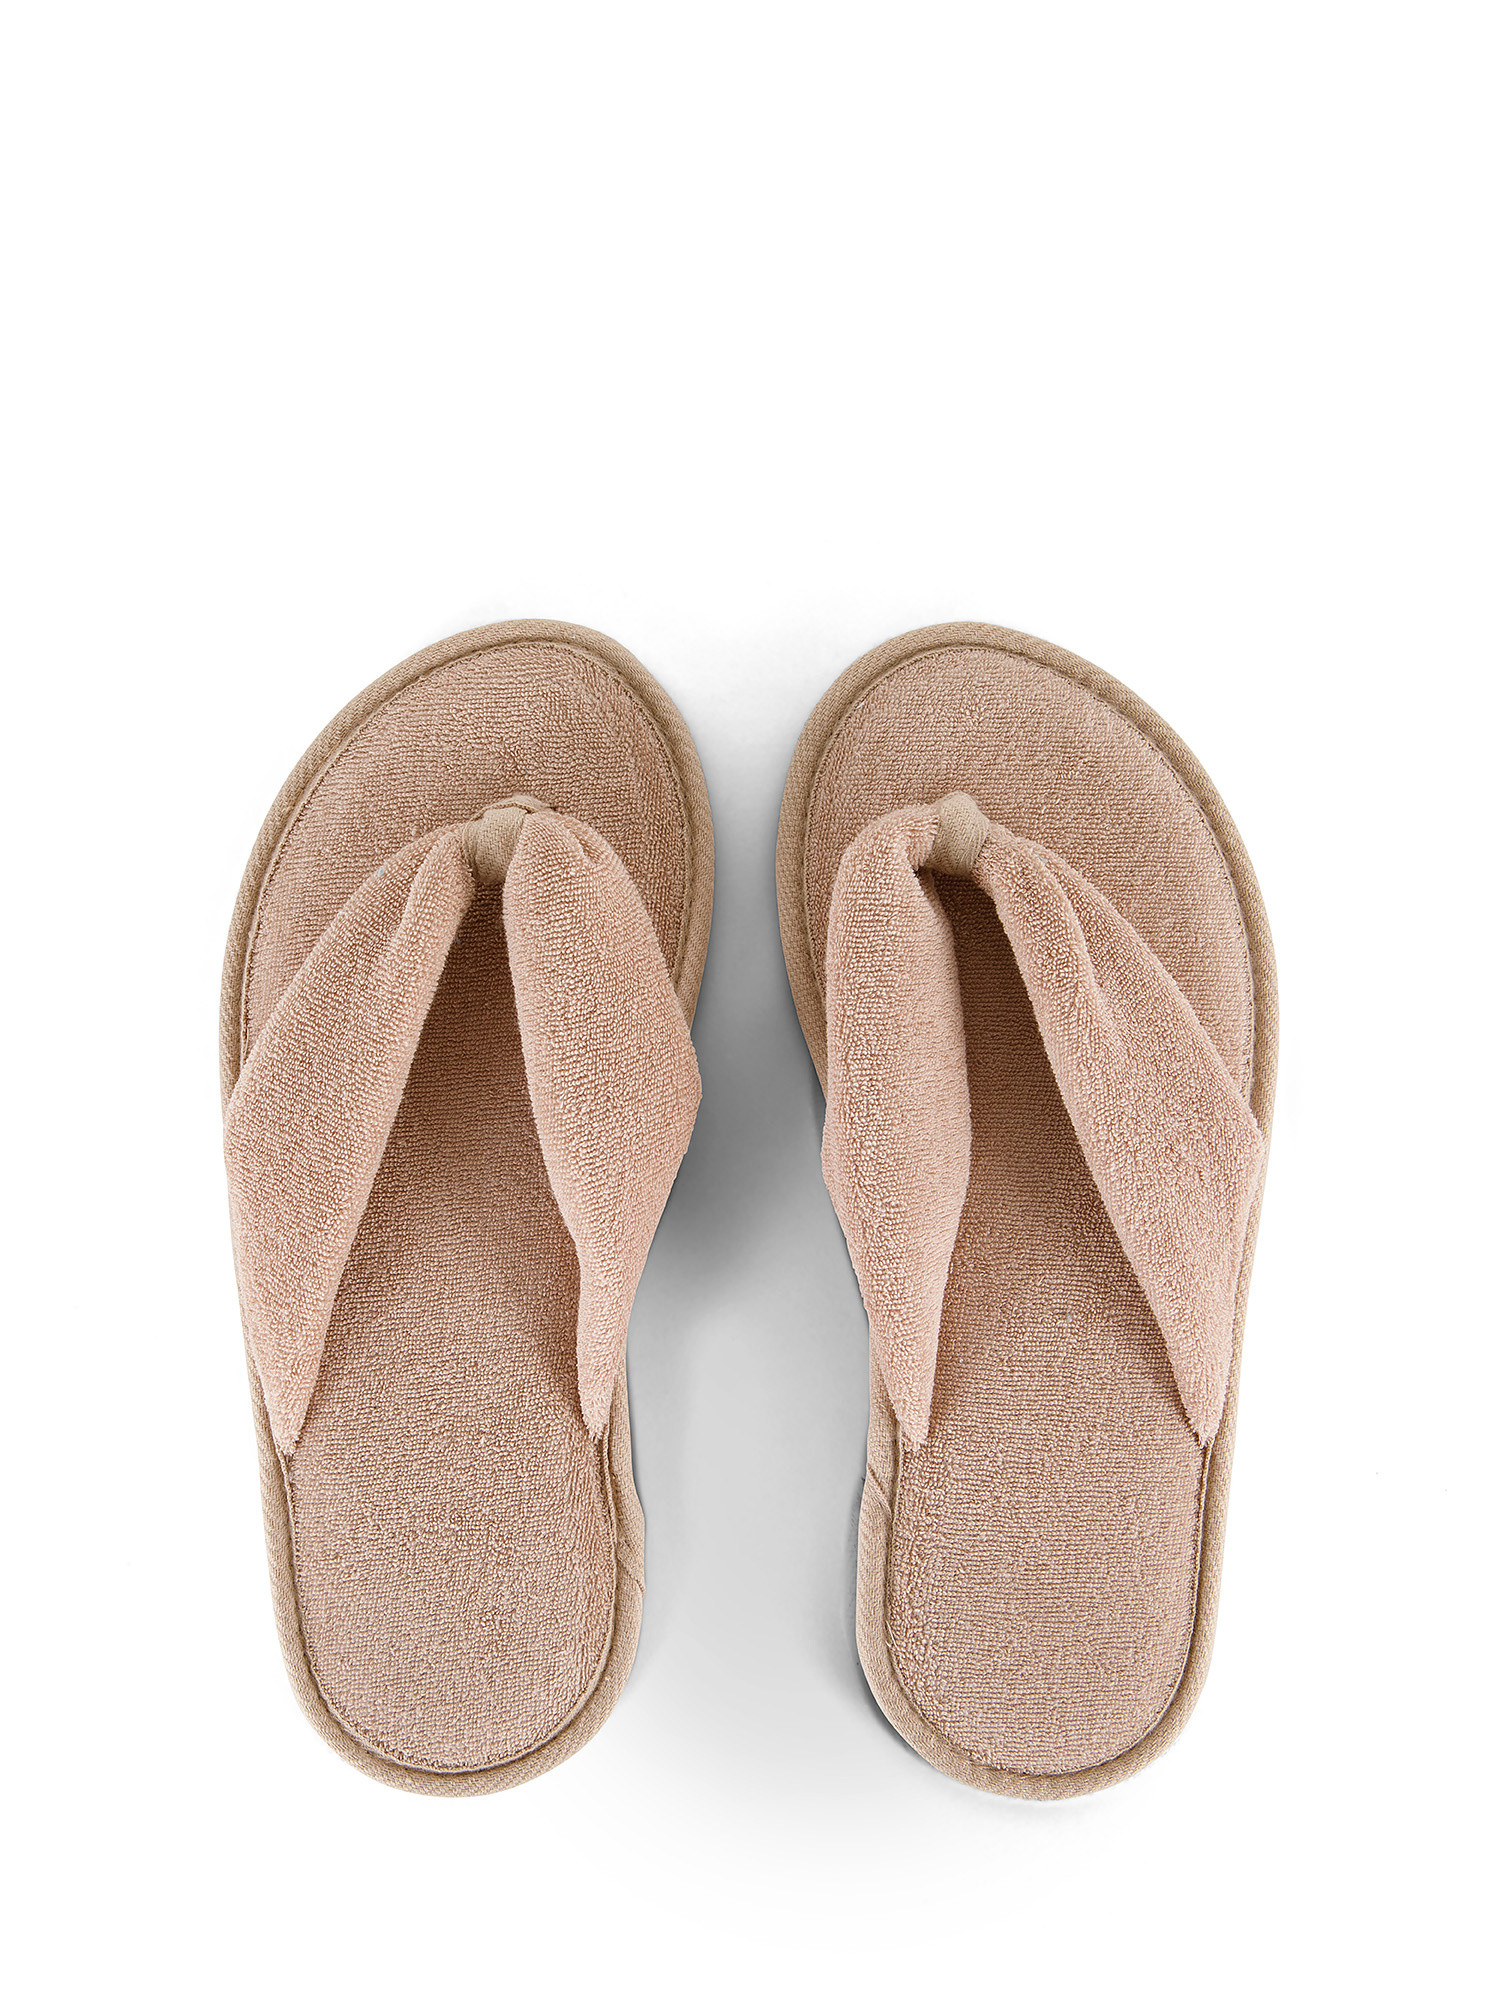 Solid color micro sponge thong slippers, Beige, large image number 0